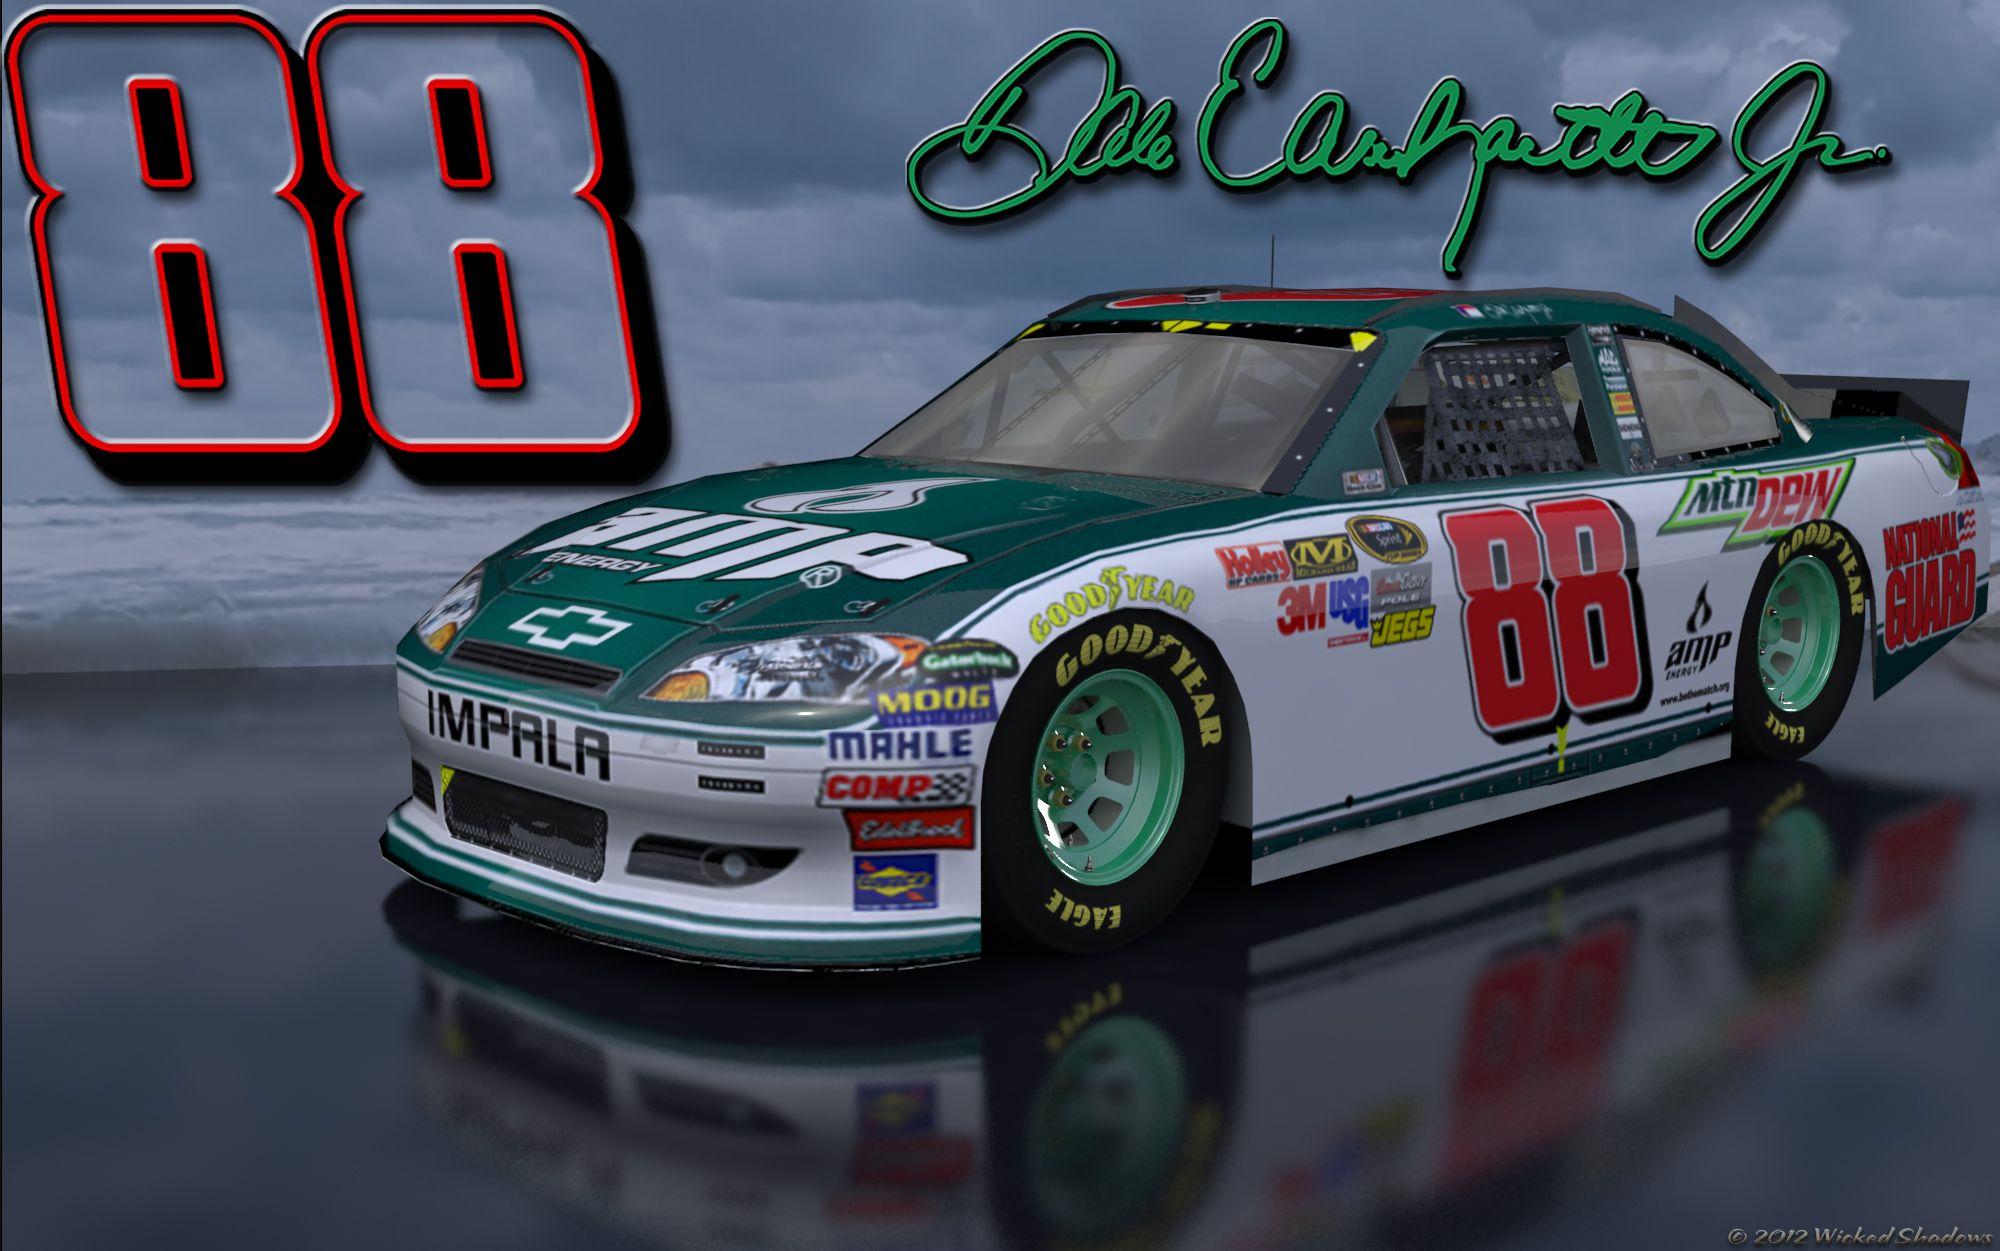 Wallpaper By Wicked Shadows: Dale Earnhardt Jr Amp Green 1 Outdoors